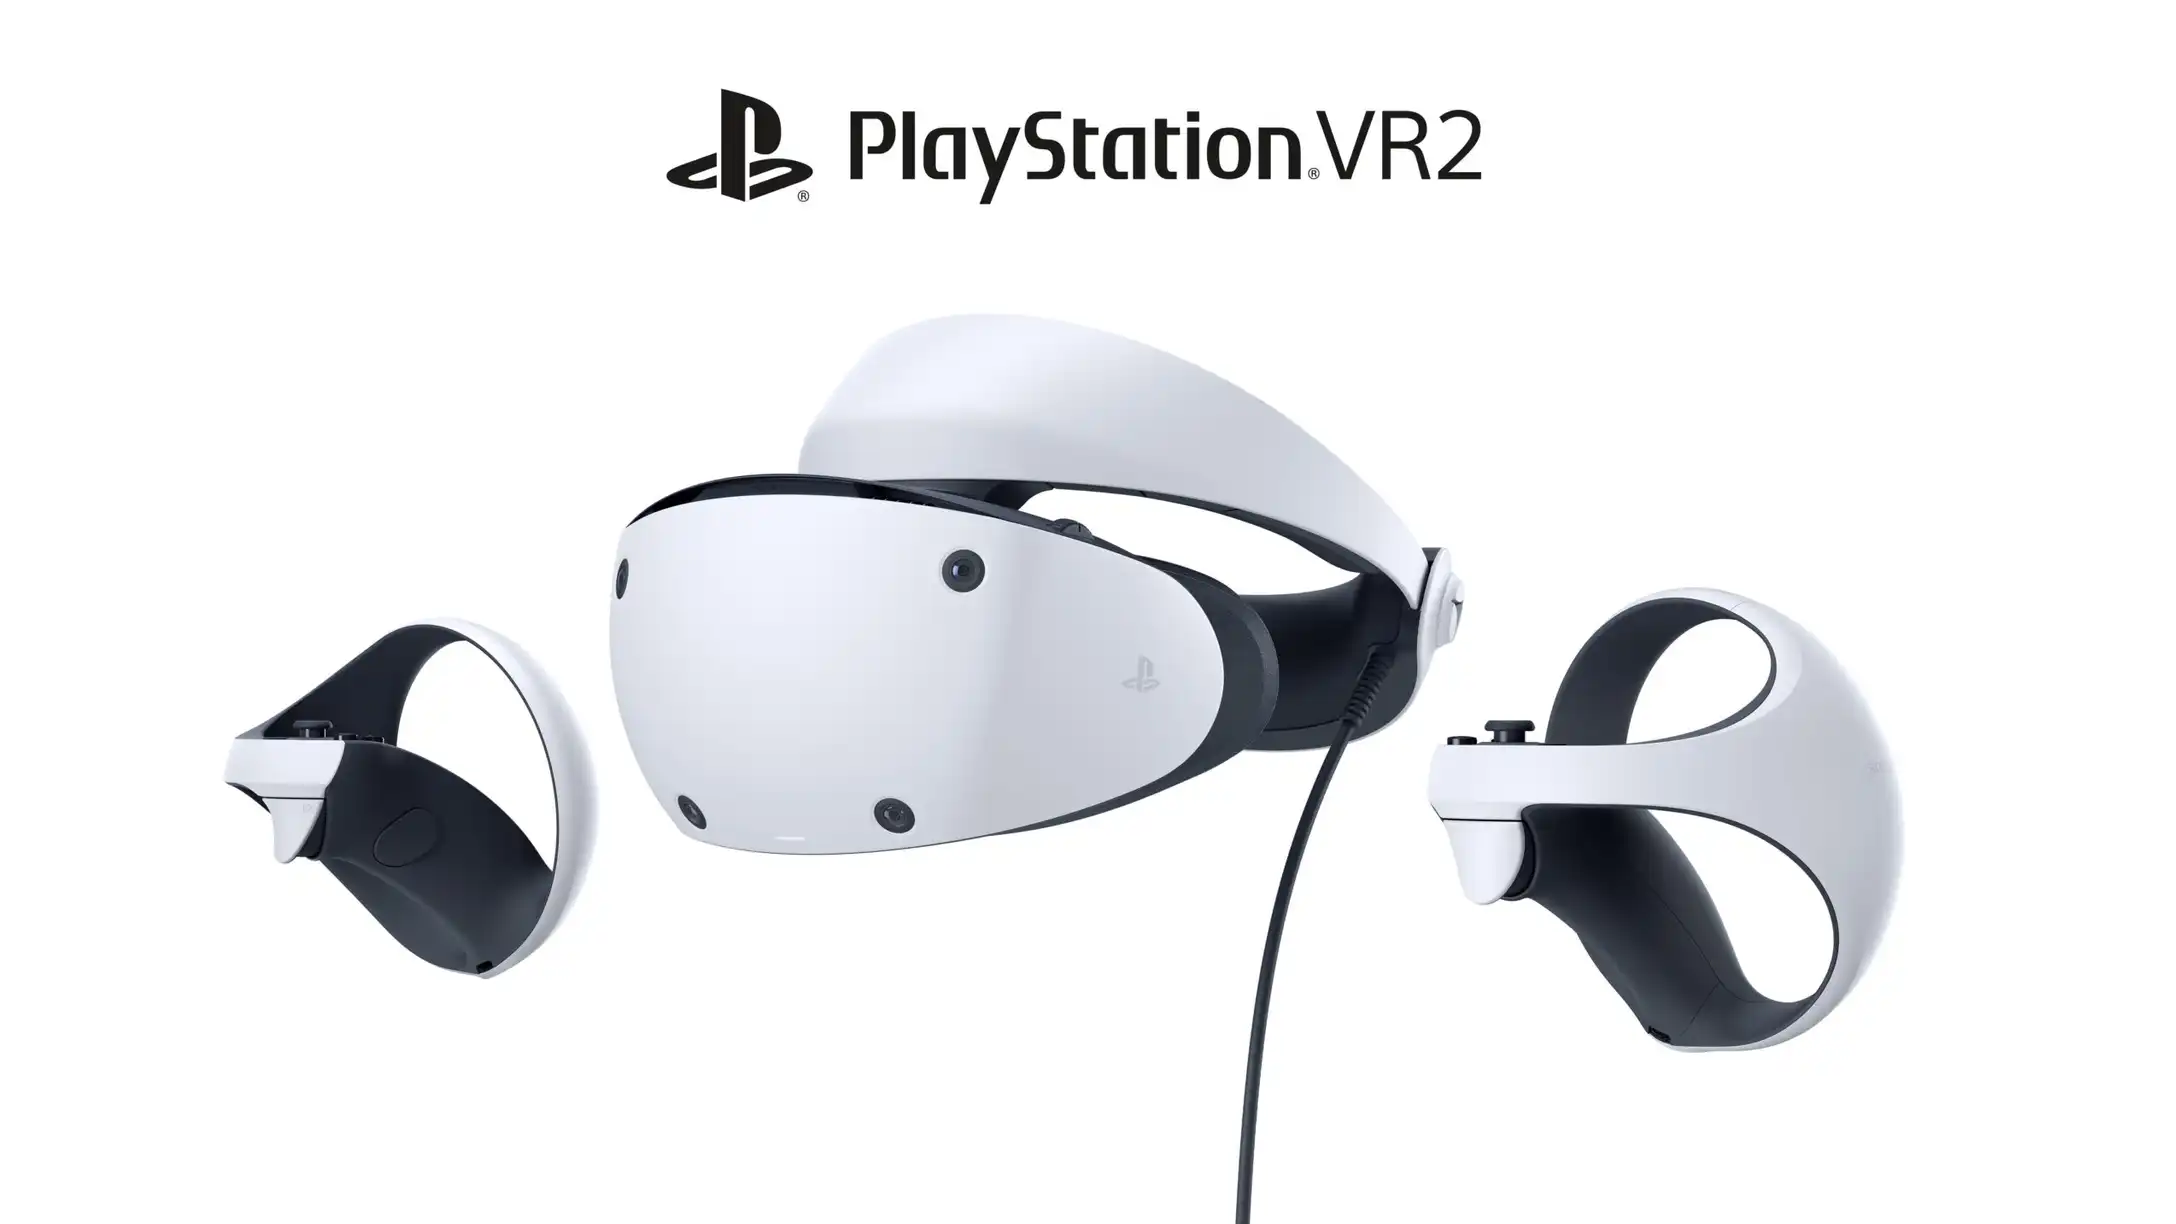 sony playstation vr2: official design and specifications